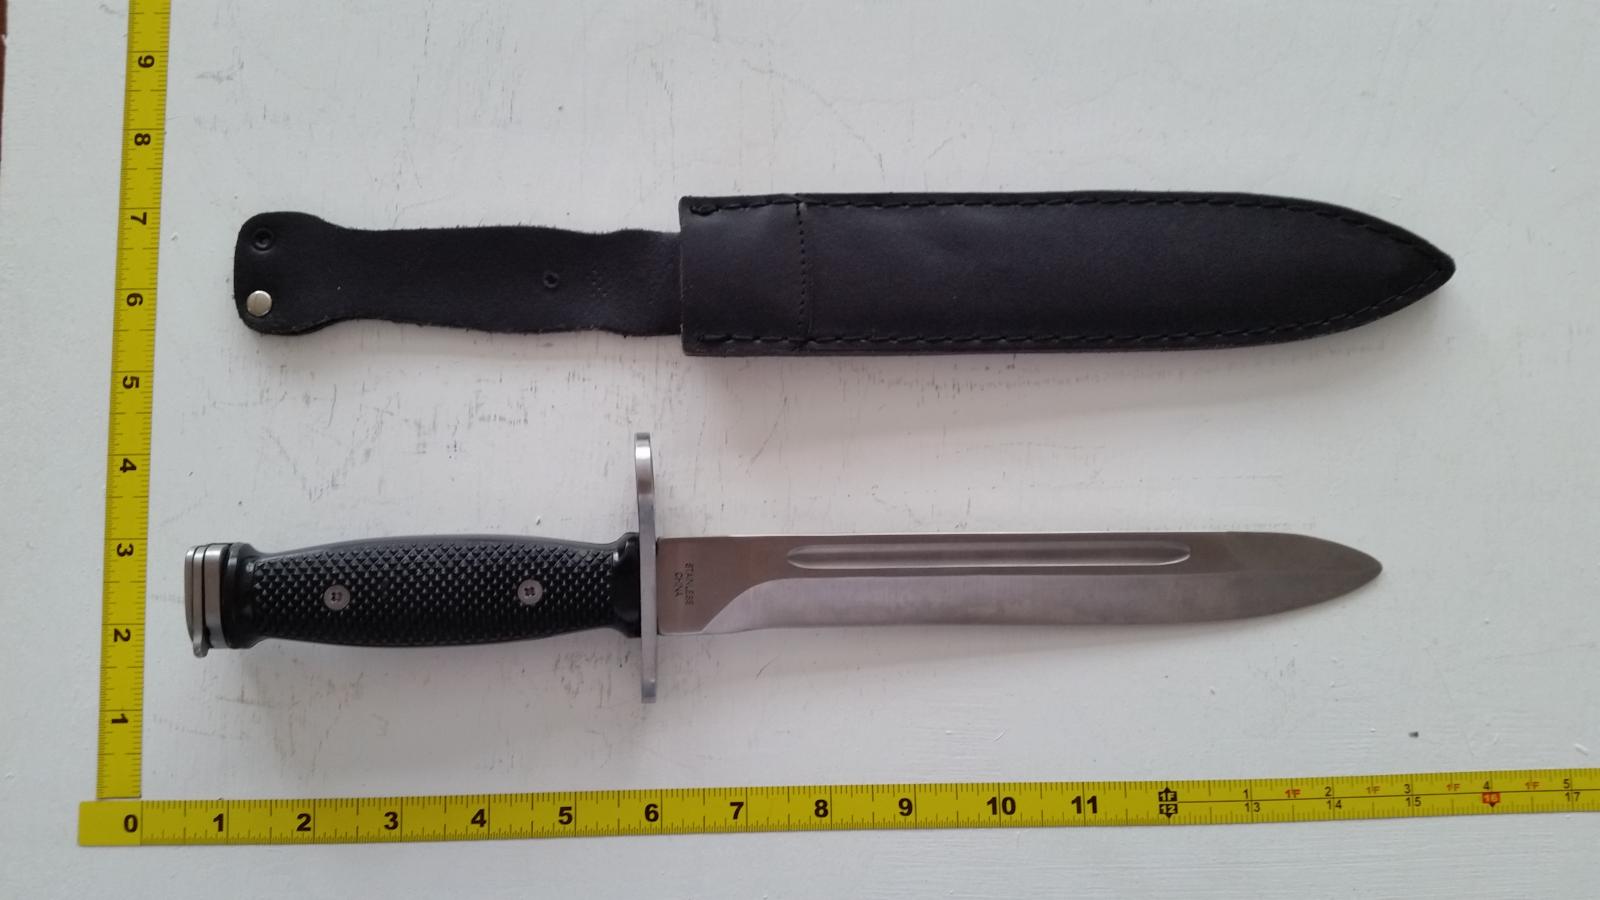 Realistic Steel Bayonet, Medium Weight, With Sheath - Approved for blade-to-blade stage combat.